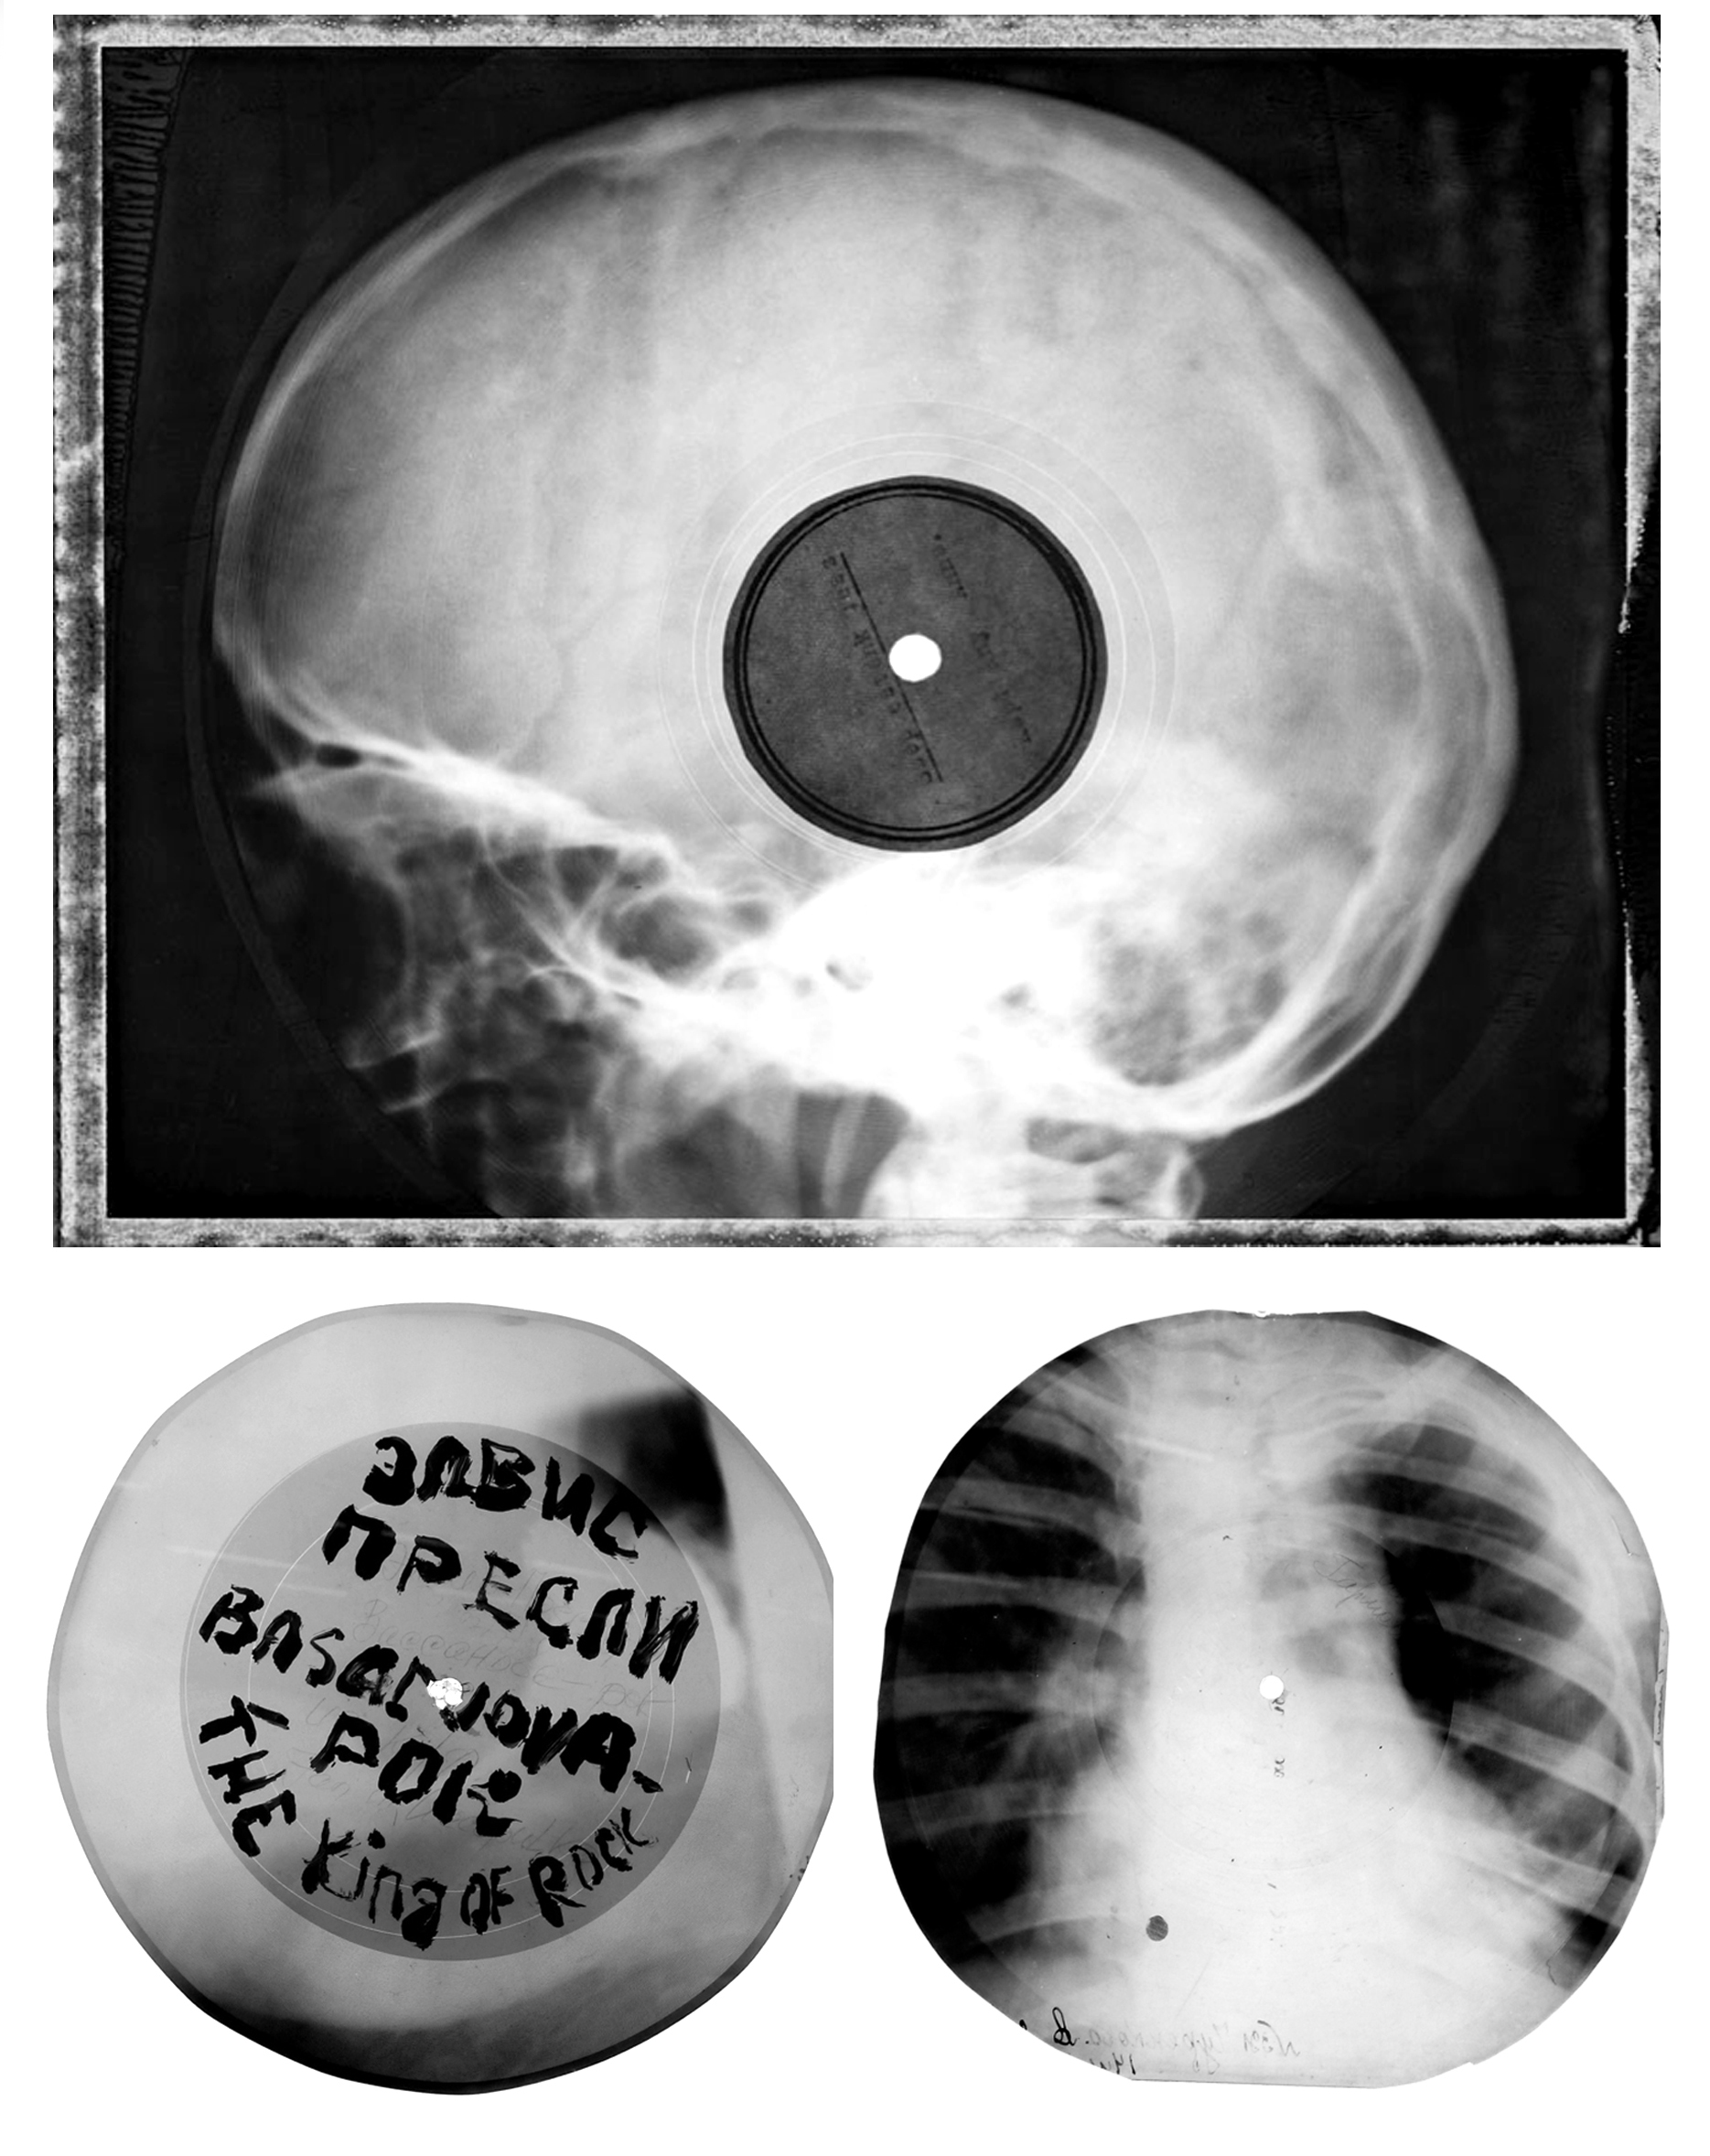 During the 1950's, with vinyl scarce, Russians began recording rock n' roll, jazz, and boogie woogie on used x-rays that they gathered from hospitals and doctors offices. They would cut a crude circle out with manicure scissors, use a cigarette to burn a hole. Images: Courtesy of Jozsef Hajdu (top); Courtesy of Ksenia Vytuleva (bottom)